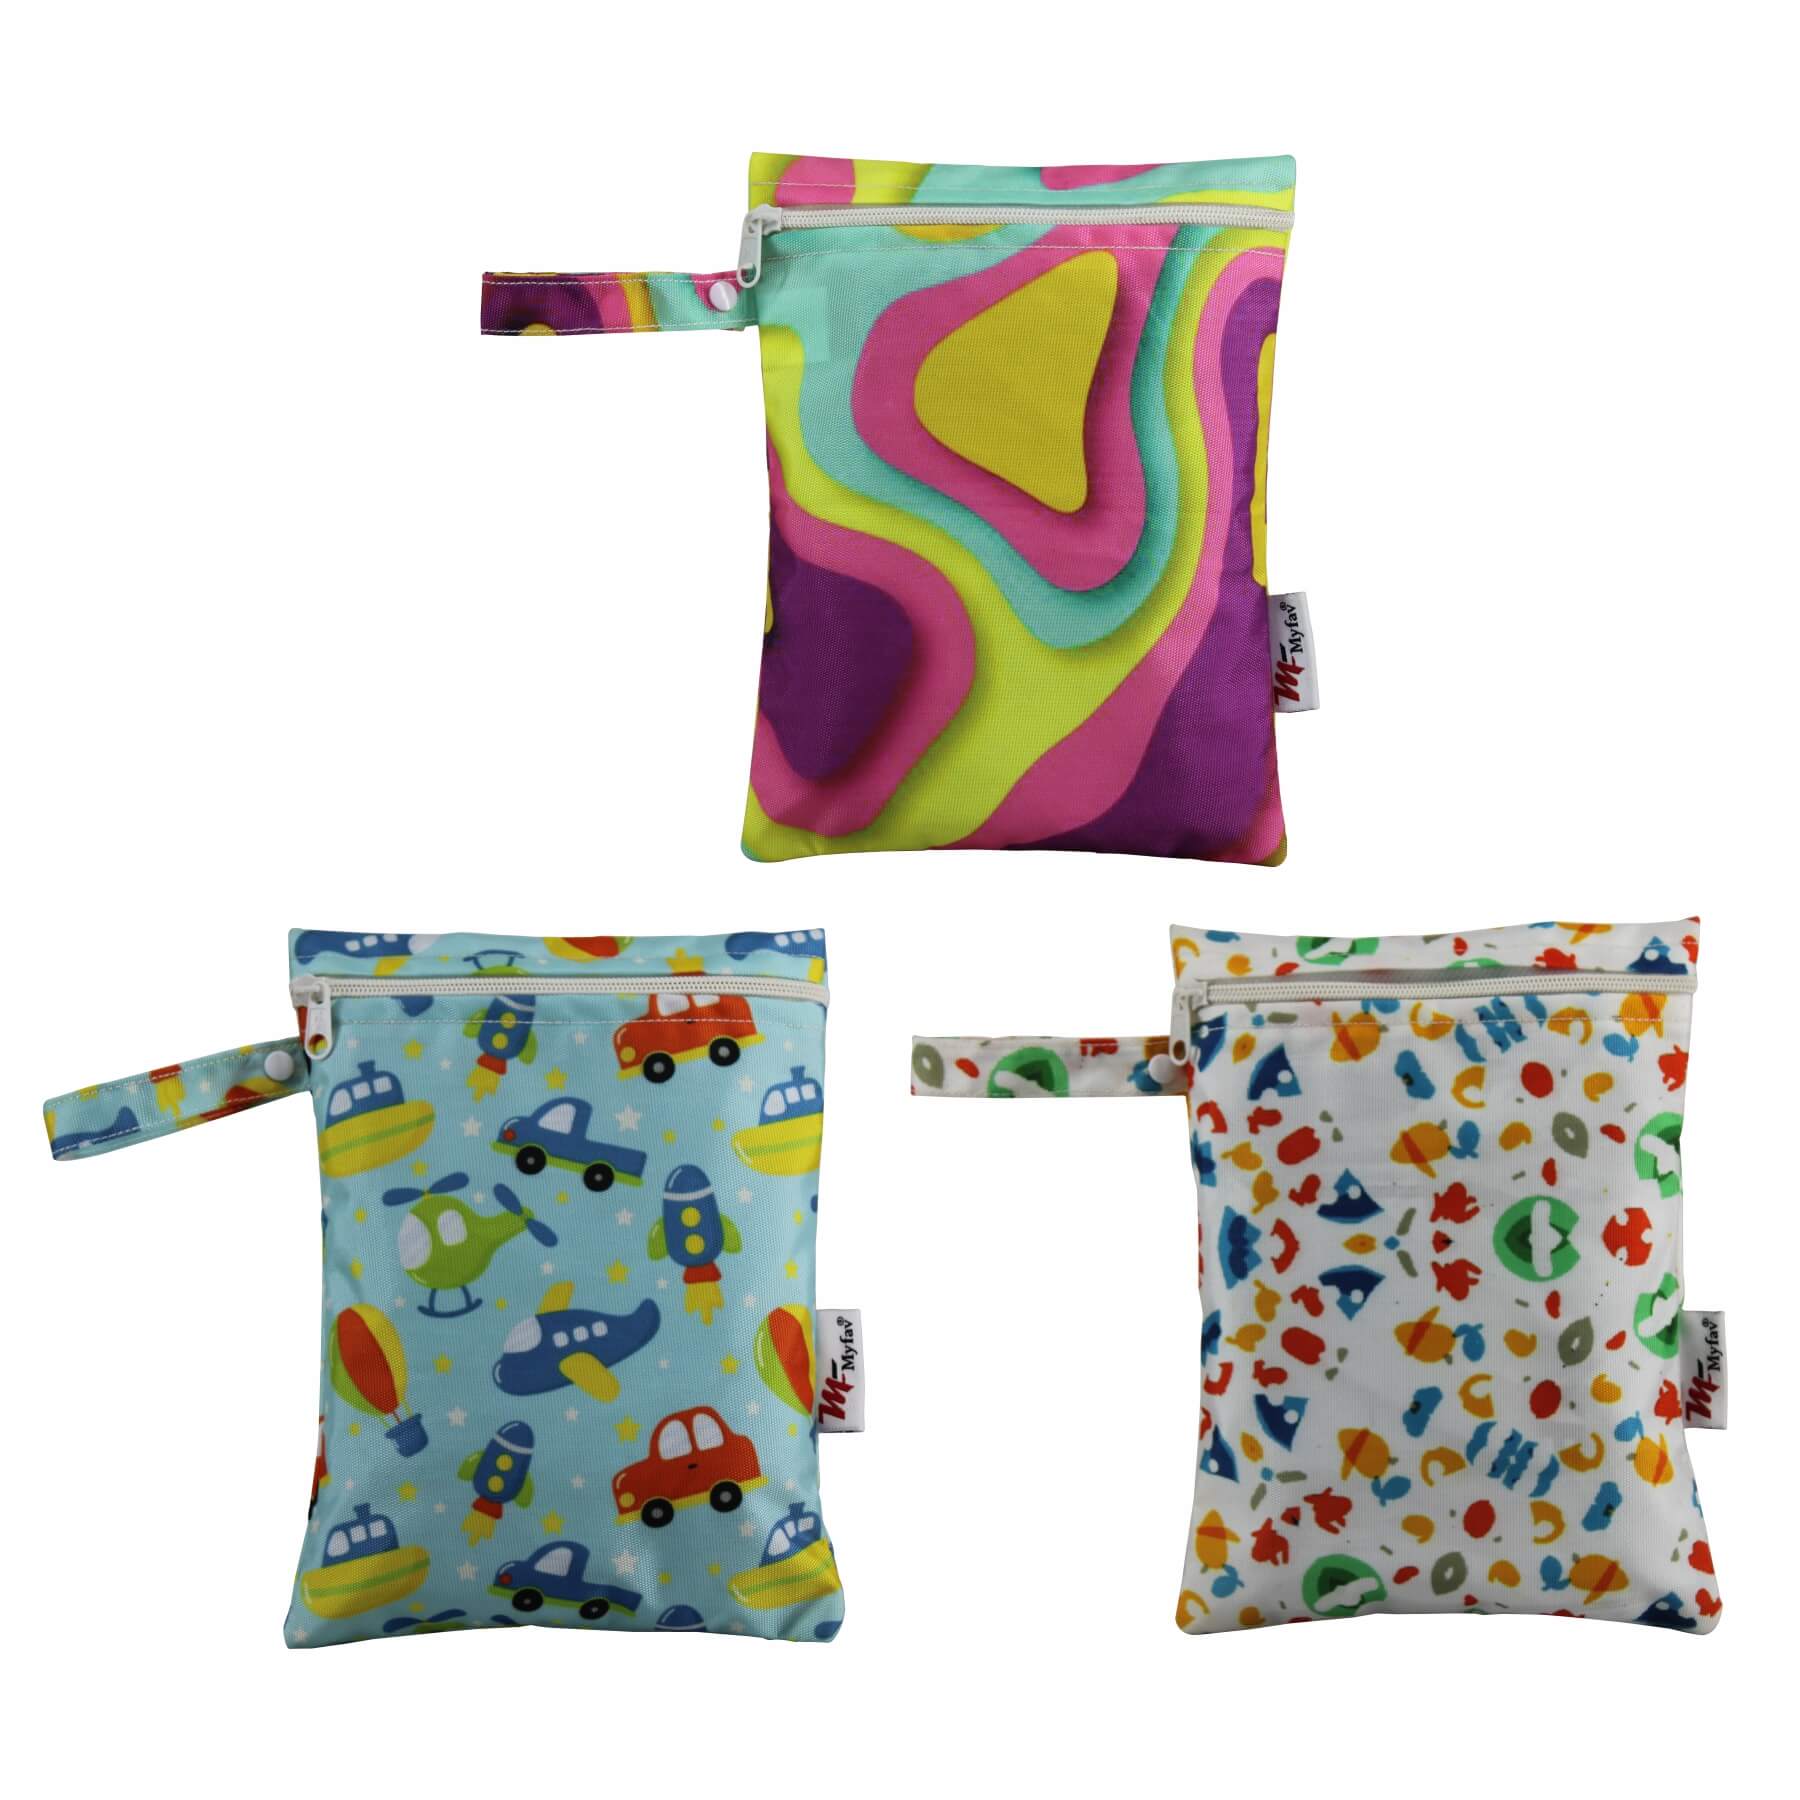 My Fav Spiral Print Multiutility Wet Dry Pouch/Diaper Bag/Travel Pouch/Travel Kit - Pack of 3